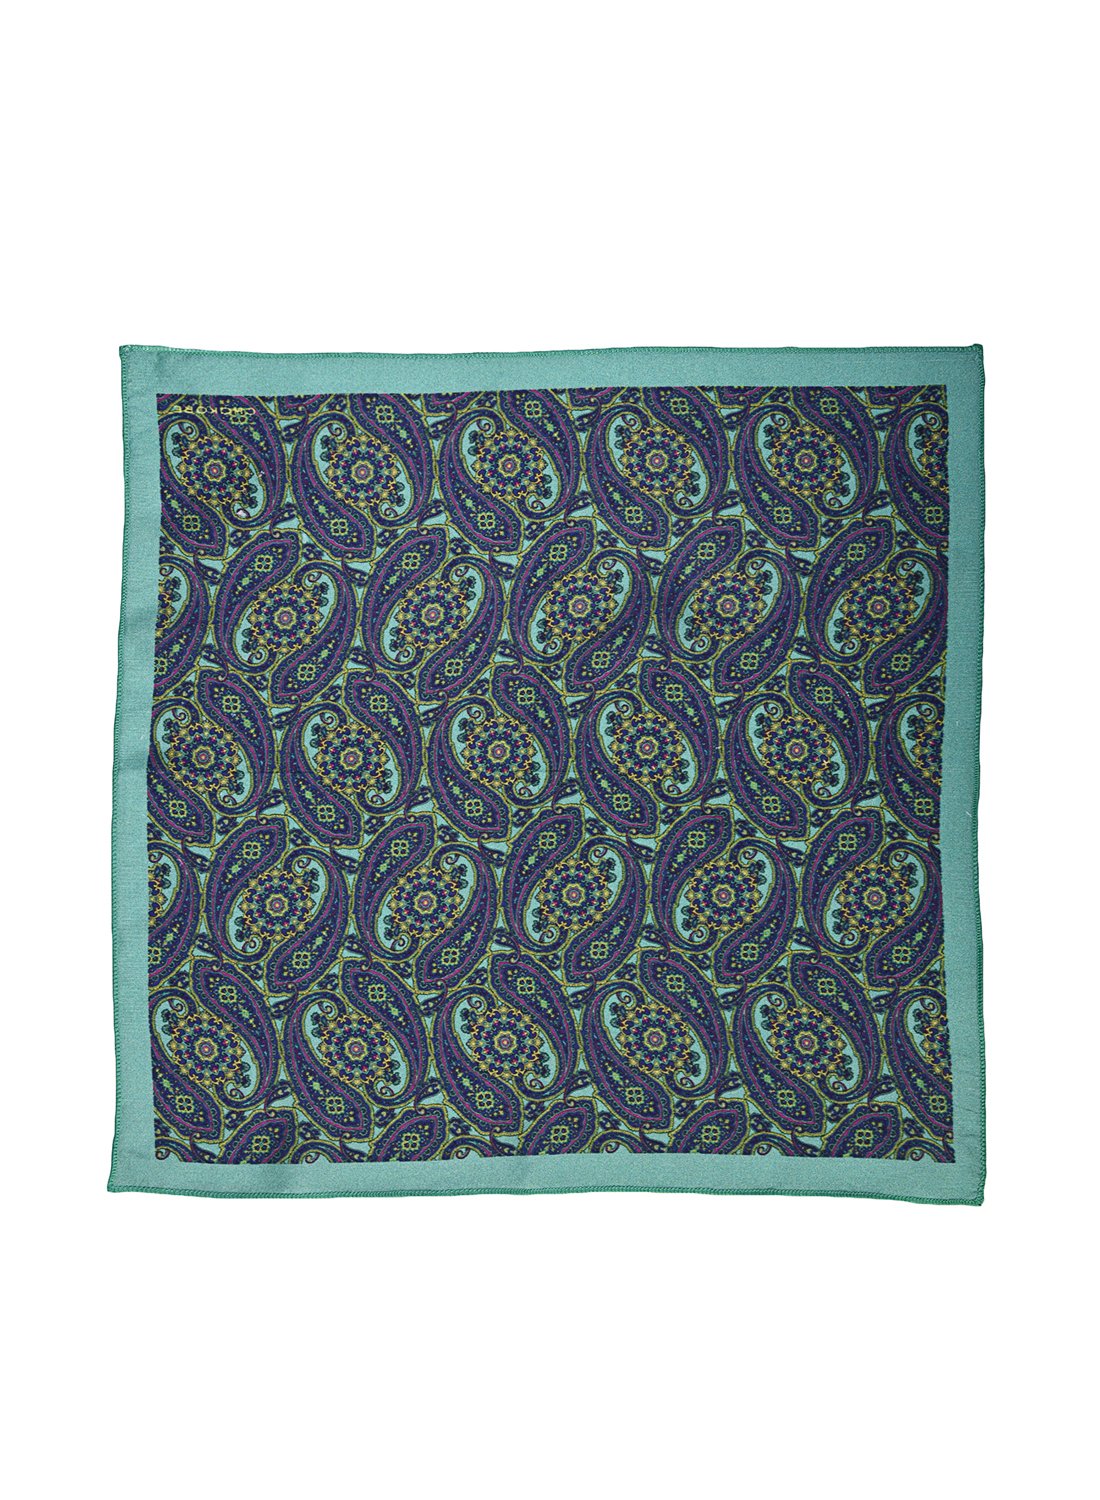 Chokore Sea Green and Blue Silk Pocket Square from Indian at Heart collection